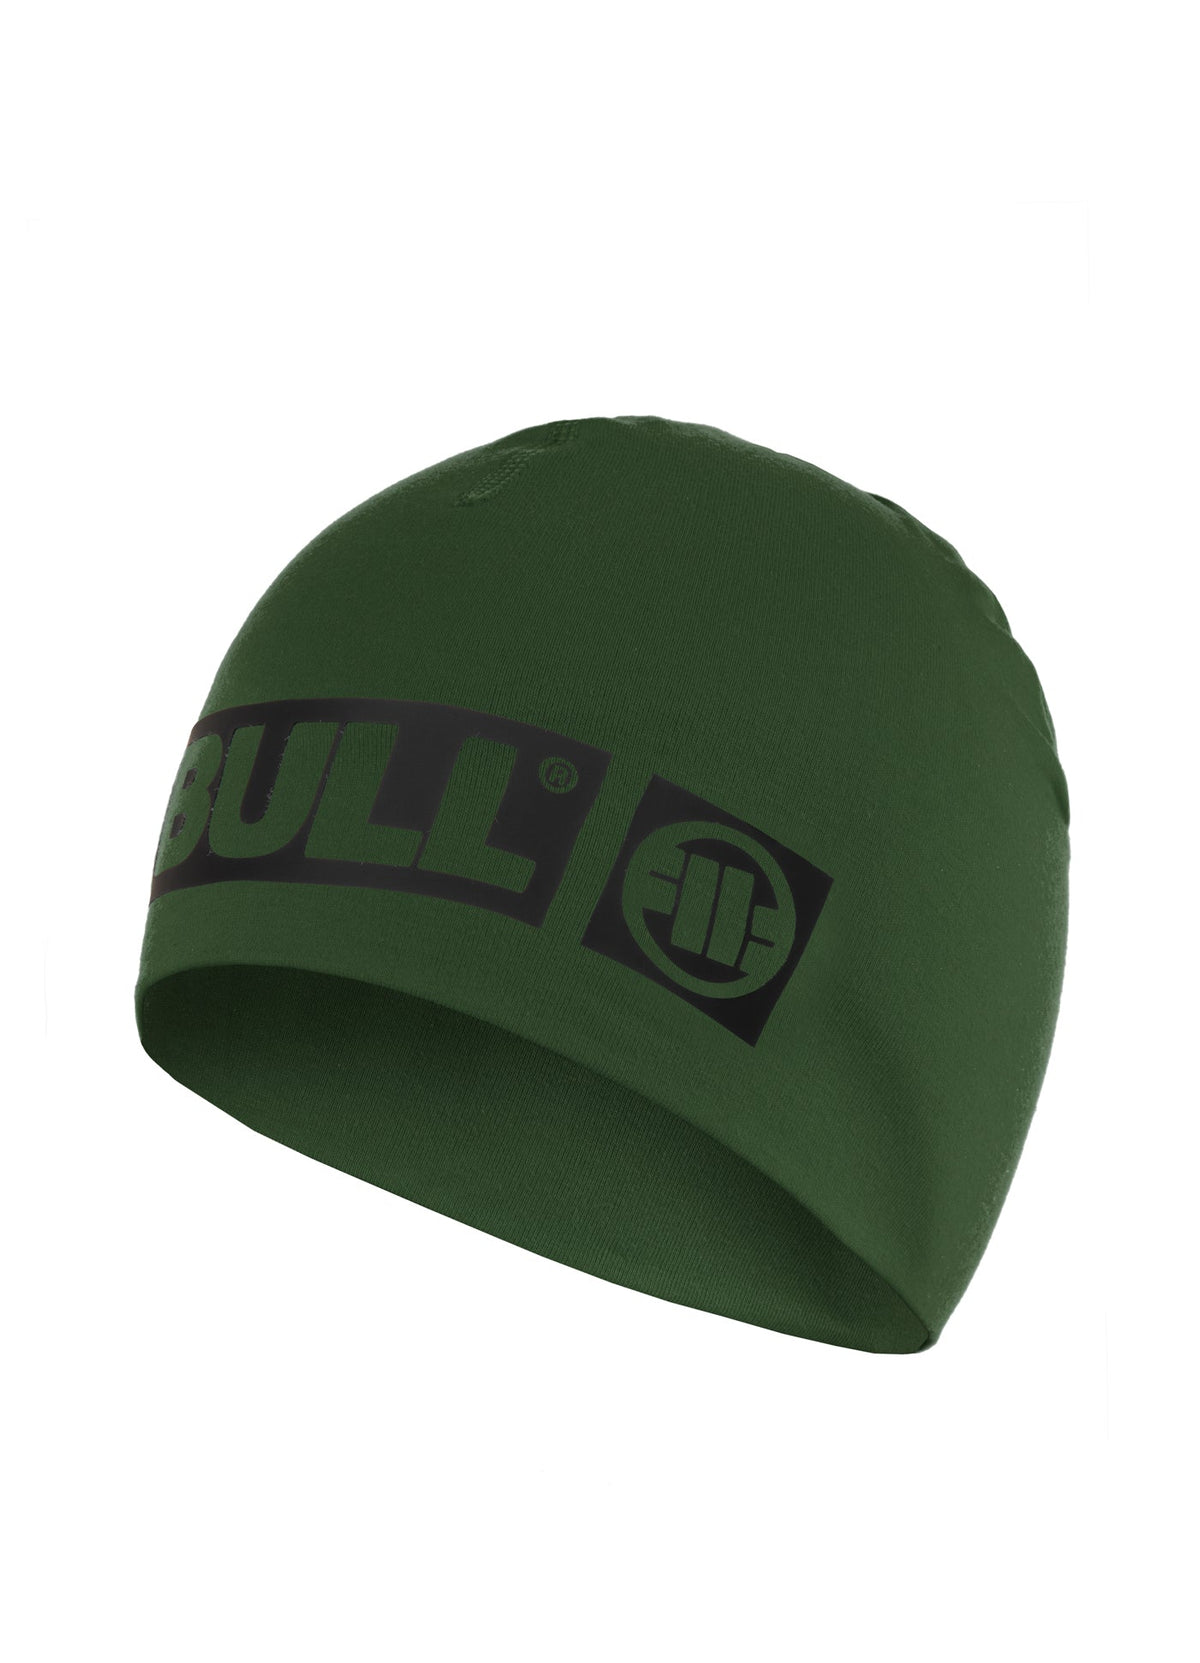 HILLTOP 2 Olive Compression Beanie